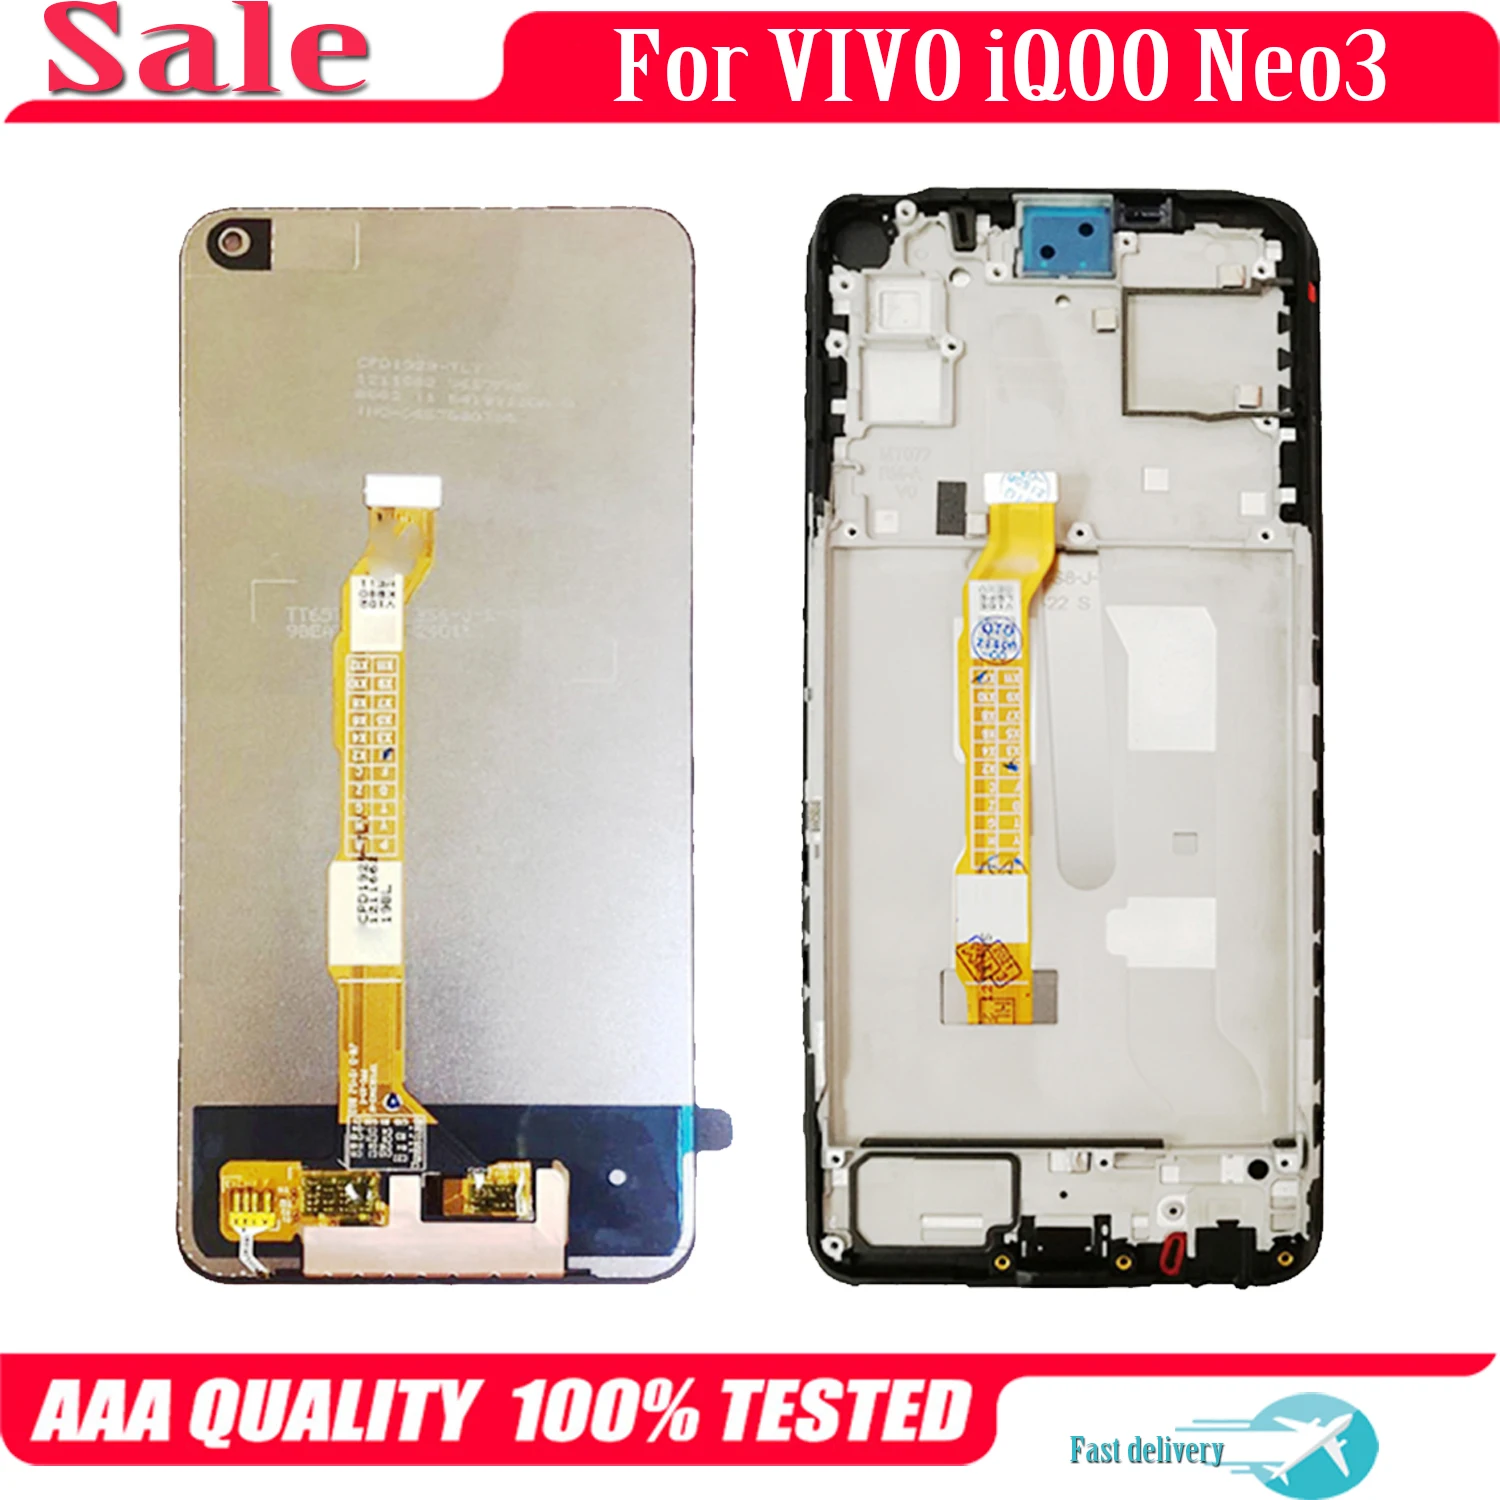 

Original 6.57" For VIVO iQOO Neo3 Neo 3 5G V1981A LCD Display Touch Screen Replacement Digitizer Assembly